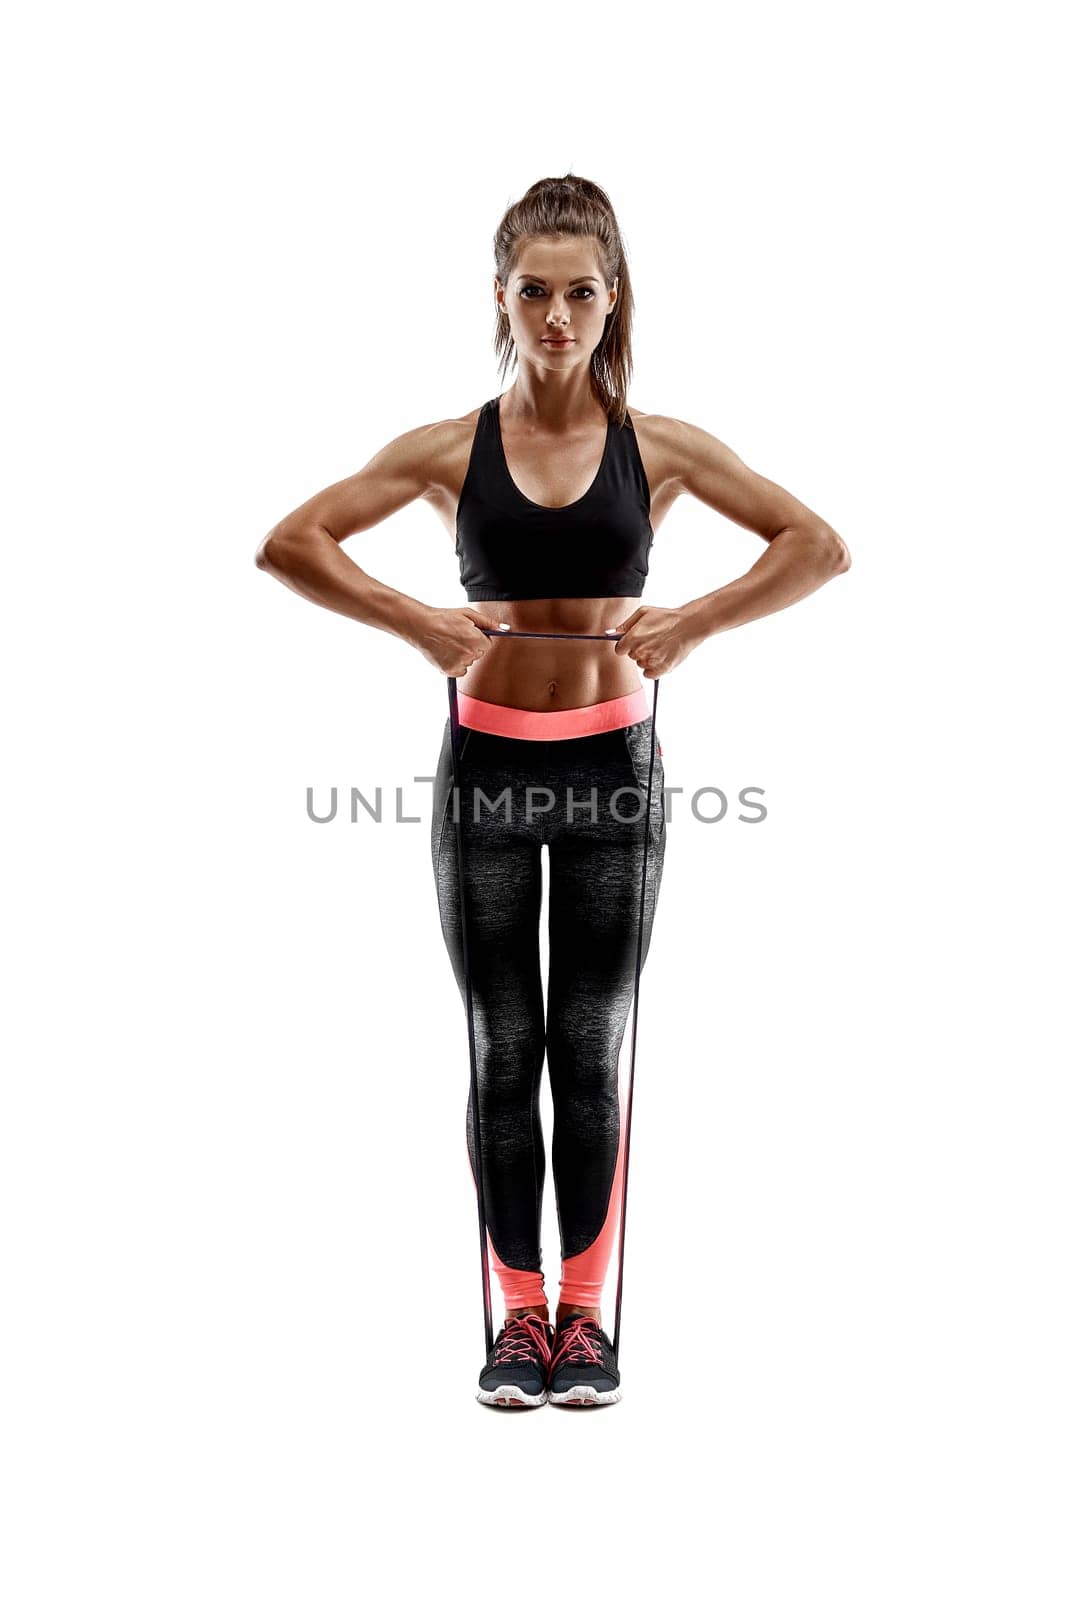 One caucasian woman exercising fitness resistance bands in studio silhouette isolated on white background